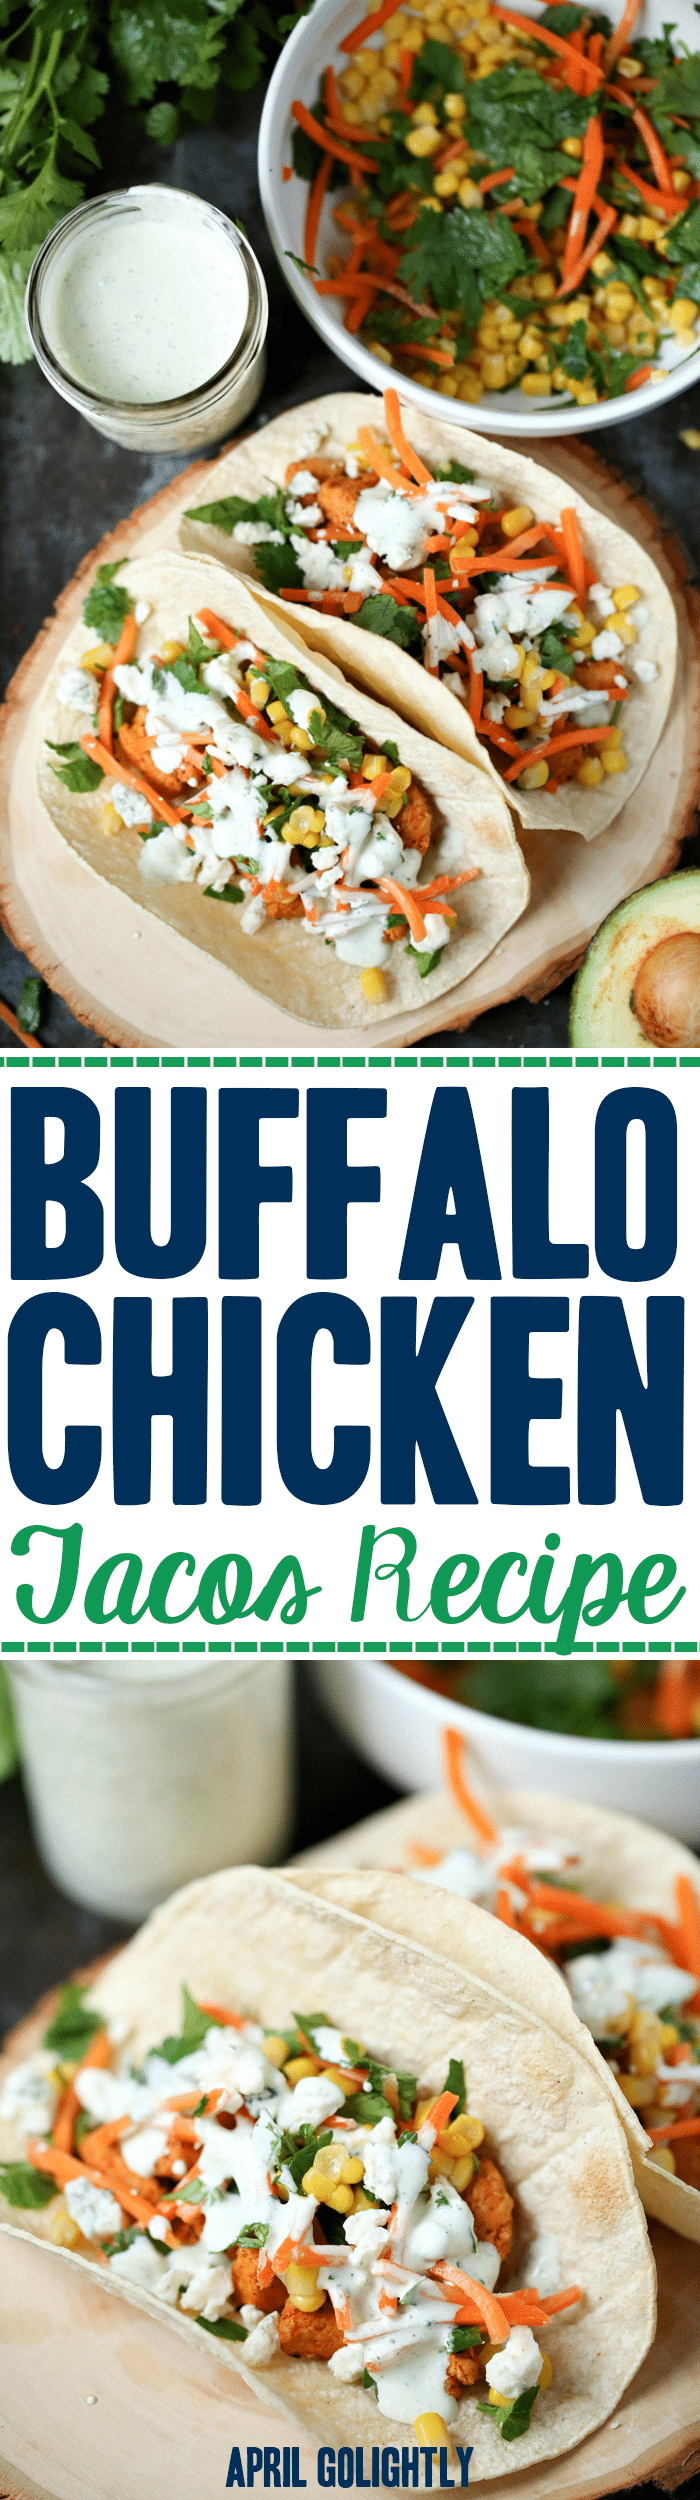 Easy Buffalo Chicken Tacos Recipe with Cilantro Dressing for an awesome healthy and yummy dinner that your family will love 